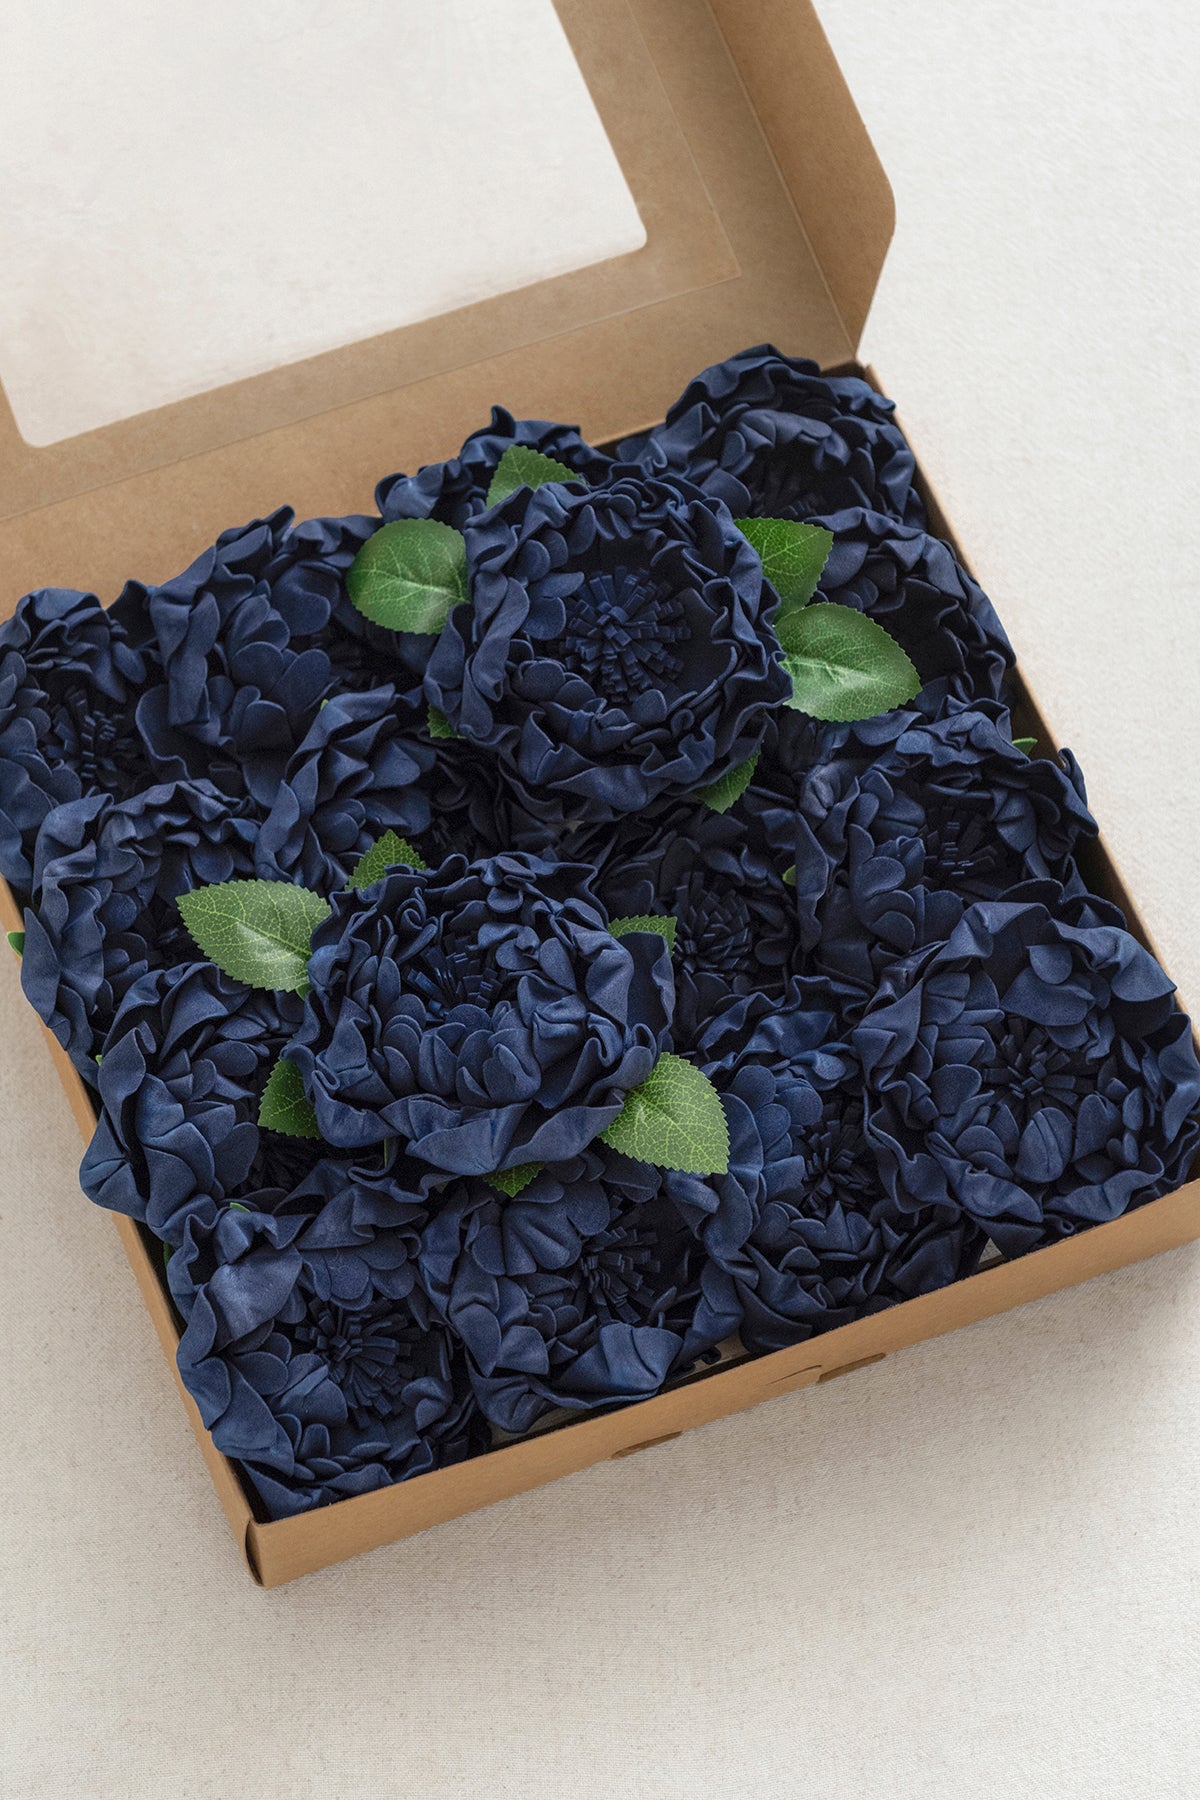 DIY Supporting Flower Boxes in Dusty Blue & Navy